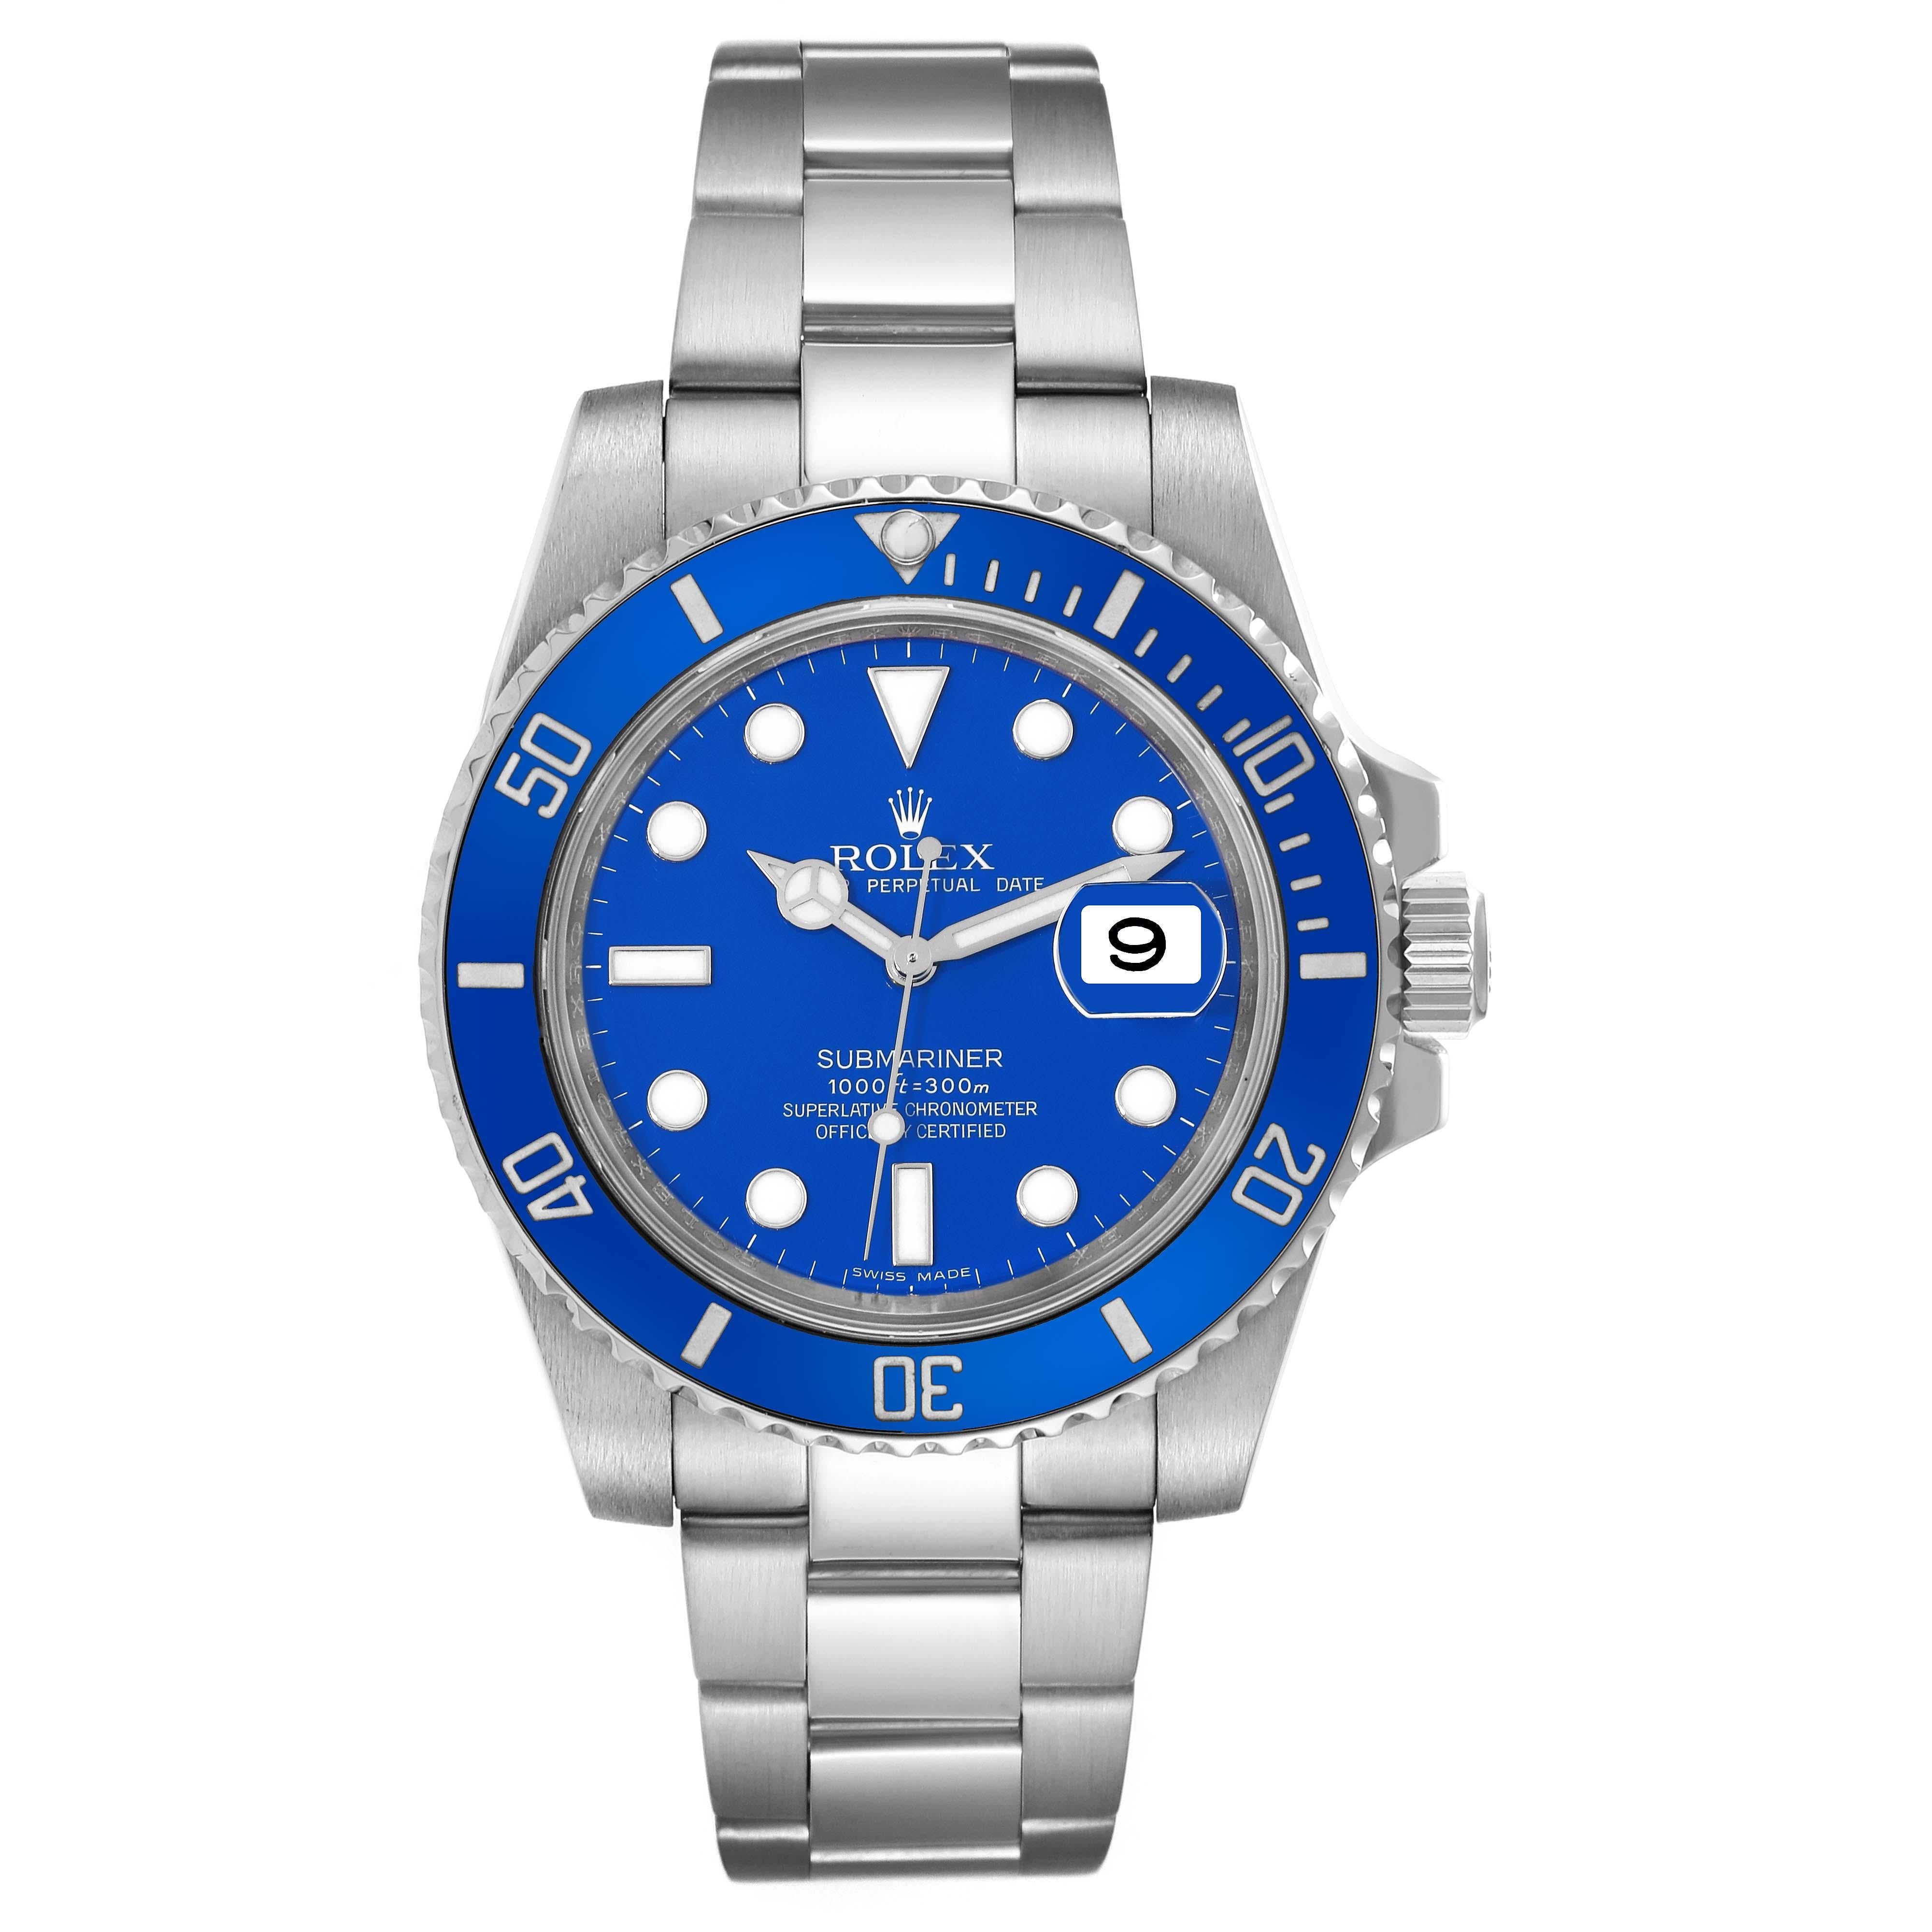 Rolex Submariner White Gold Blue Dial Ceramic Bezel Mens Watch 116619. Officially certified chronometer automatic self-winding movement. 18k white gold case 40.0 mm in diameter. Rolex logo on a crown. Ceramic blue Ion-plated special time-lapse